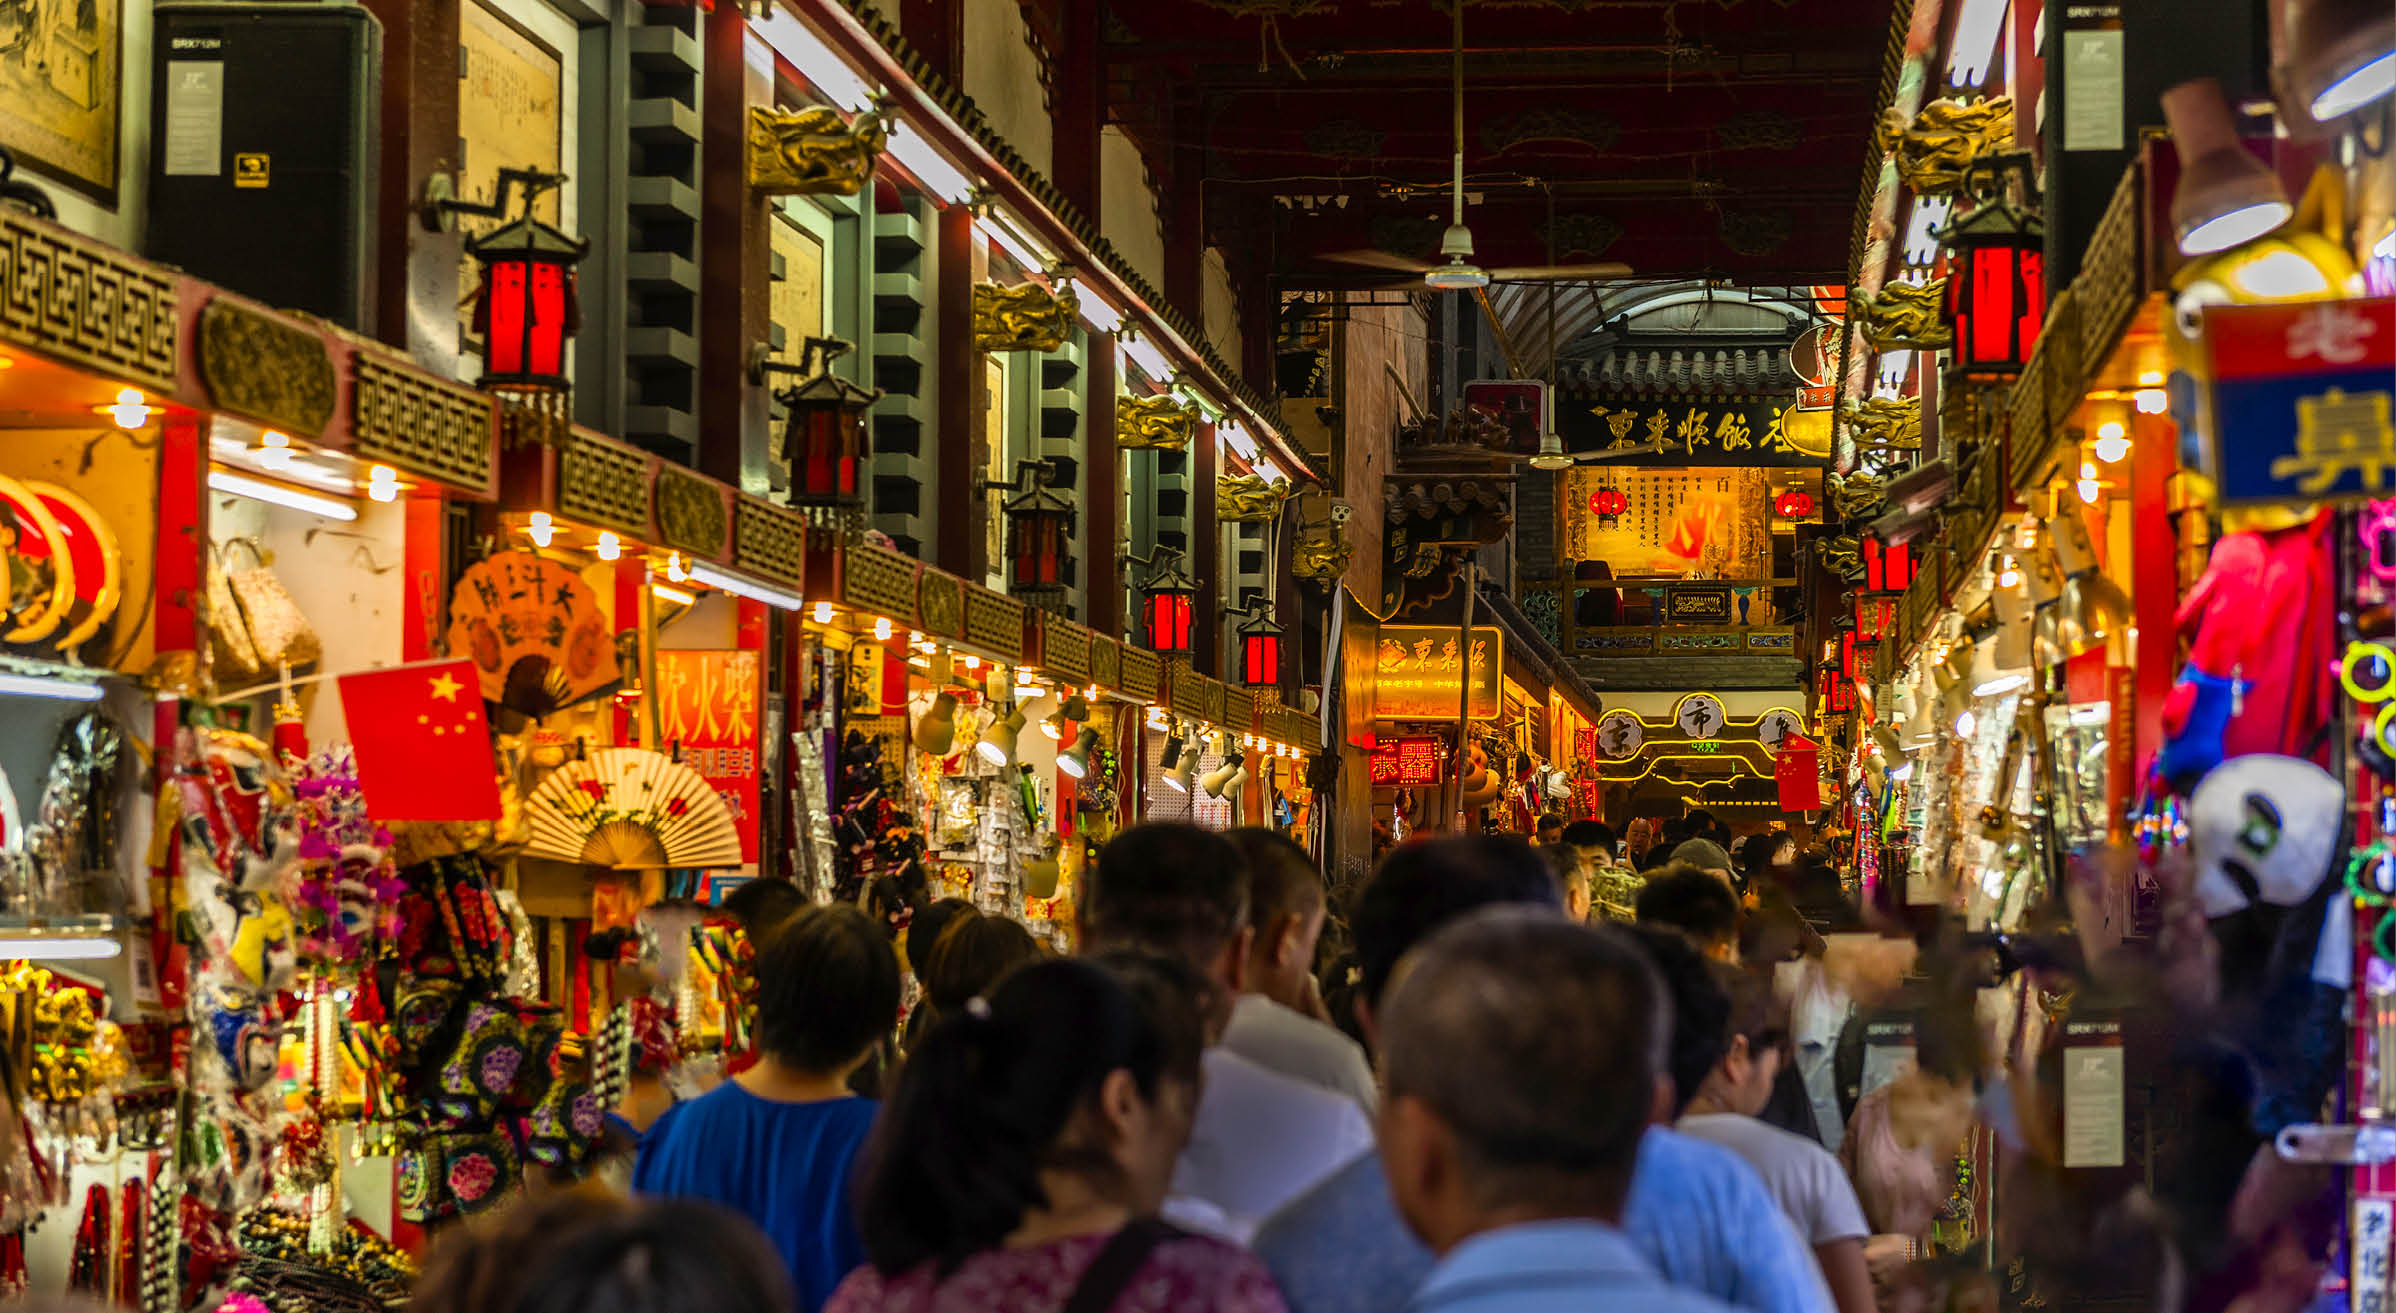 People visiting the Wangfujing Snack Street in Beijing. It is a night market with many stalls selling street snacks.,East Asia,Nikon D3x